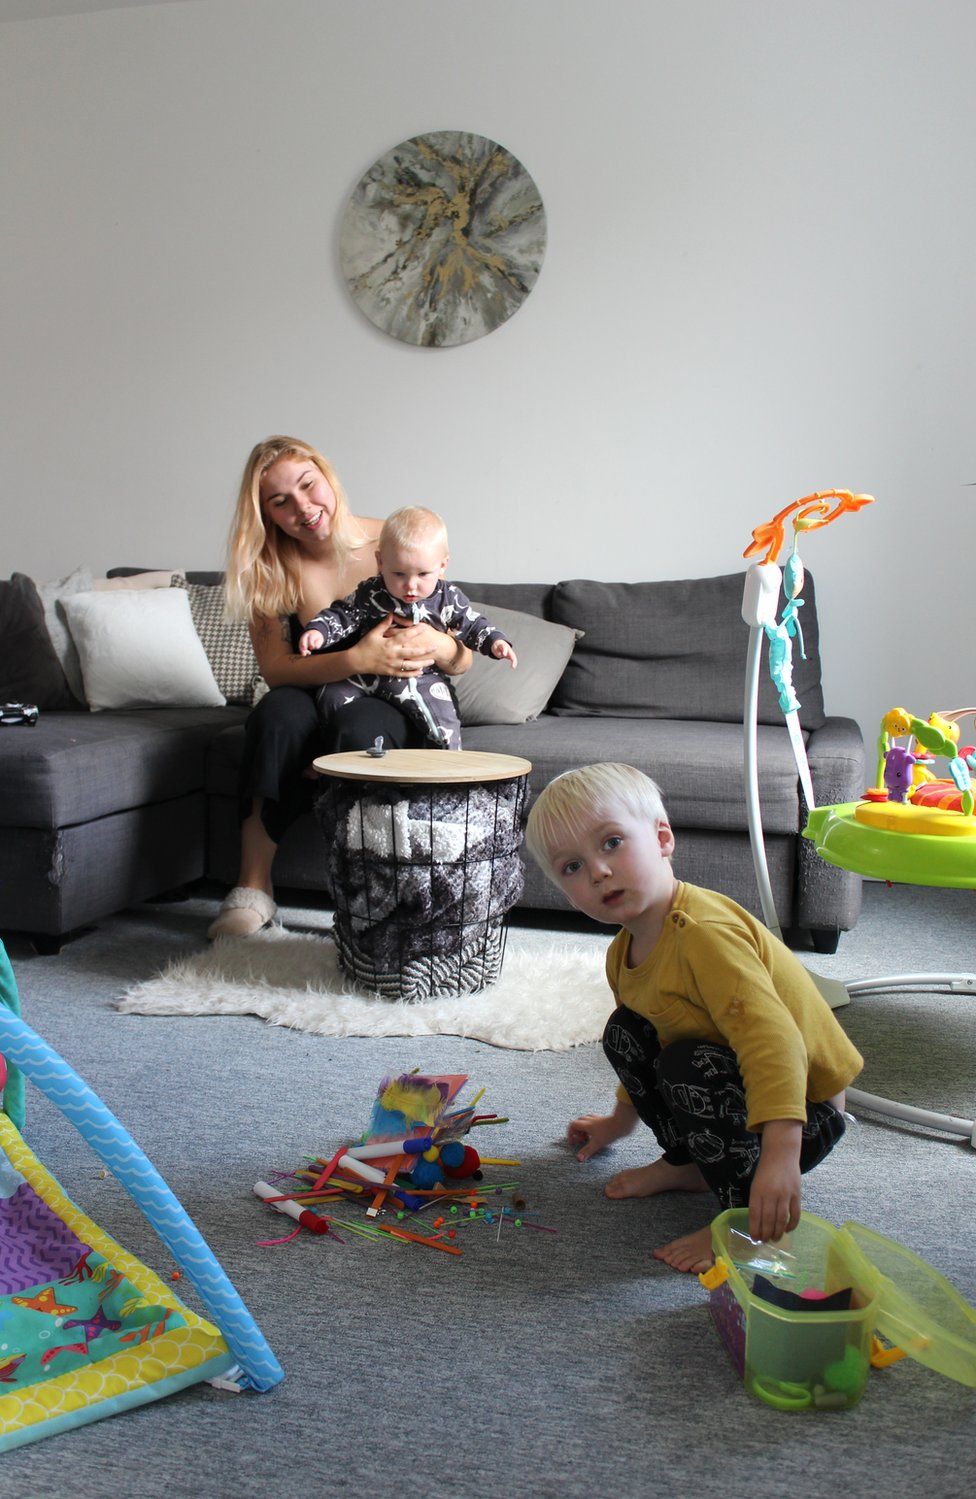 A mother sits on the sofa holding her baby as her toddler plays with his toys on the floor